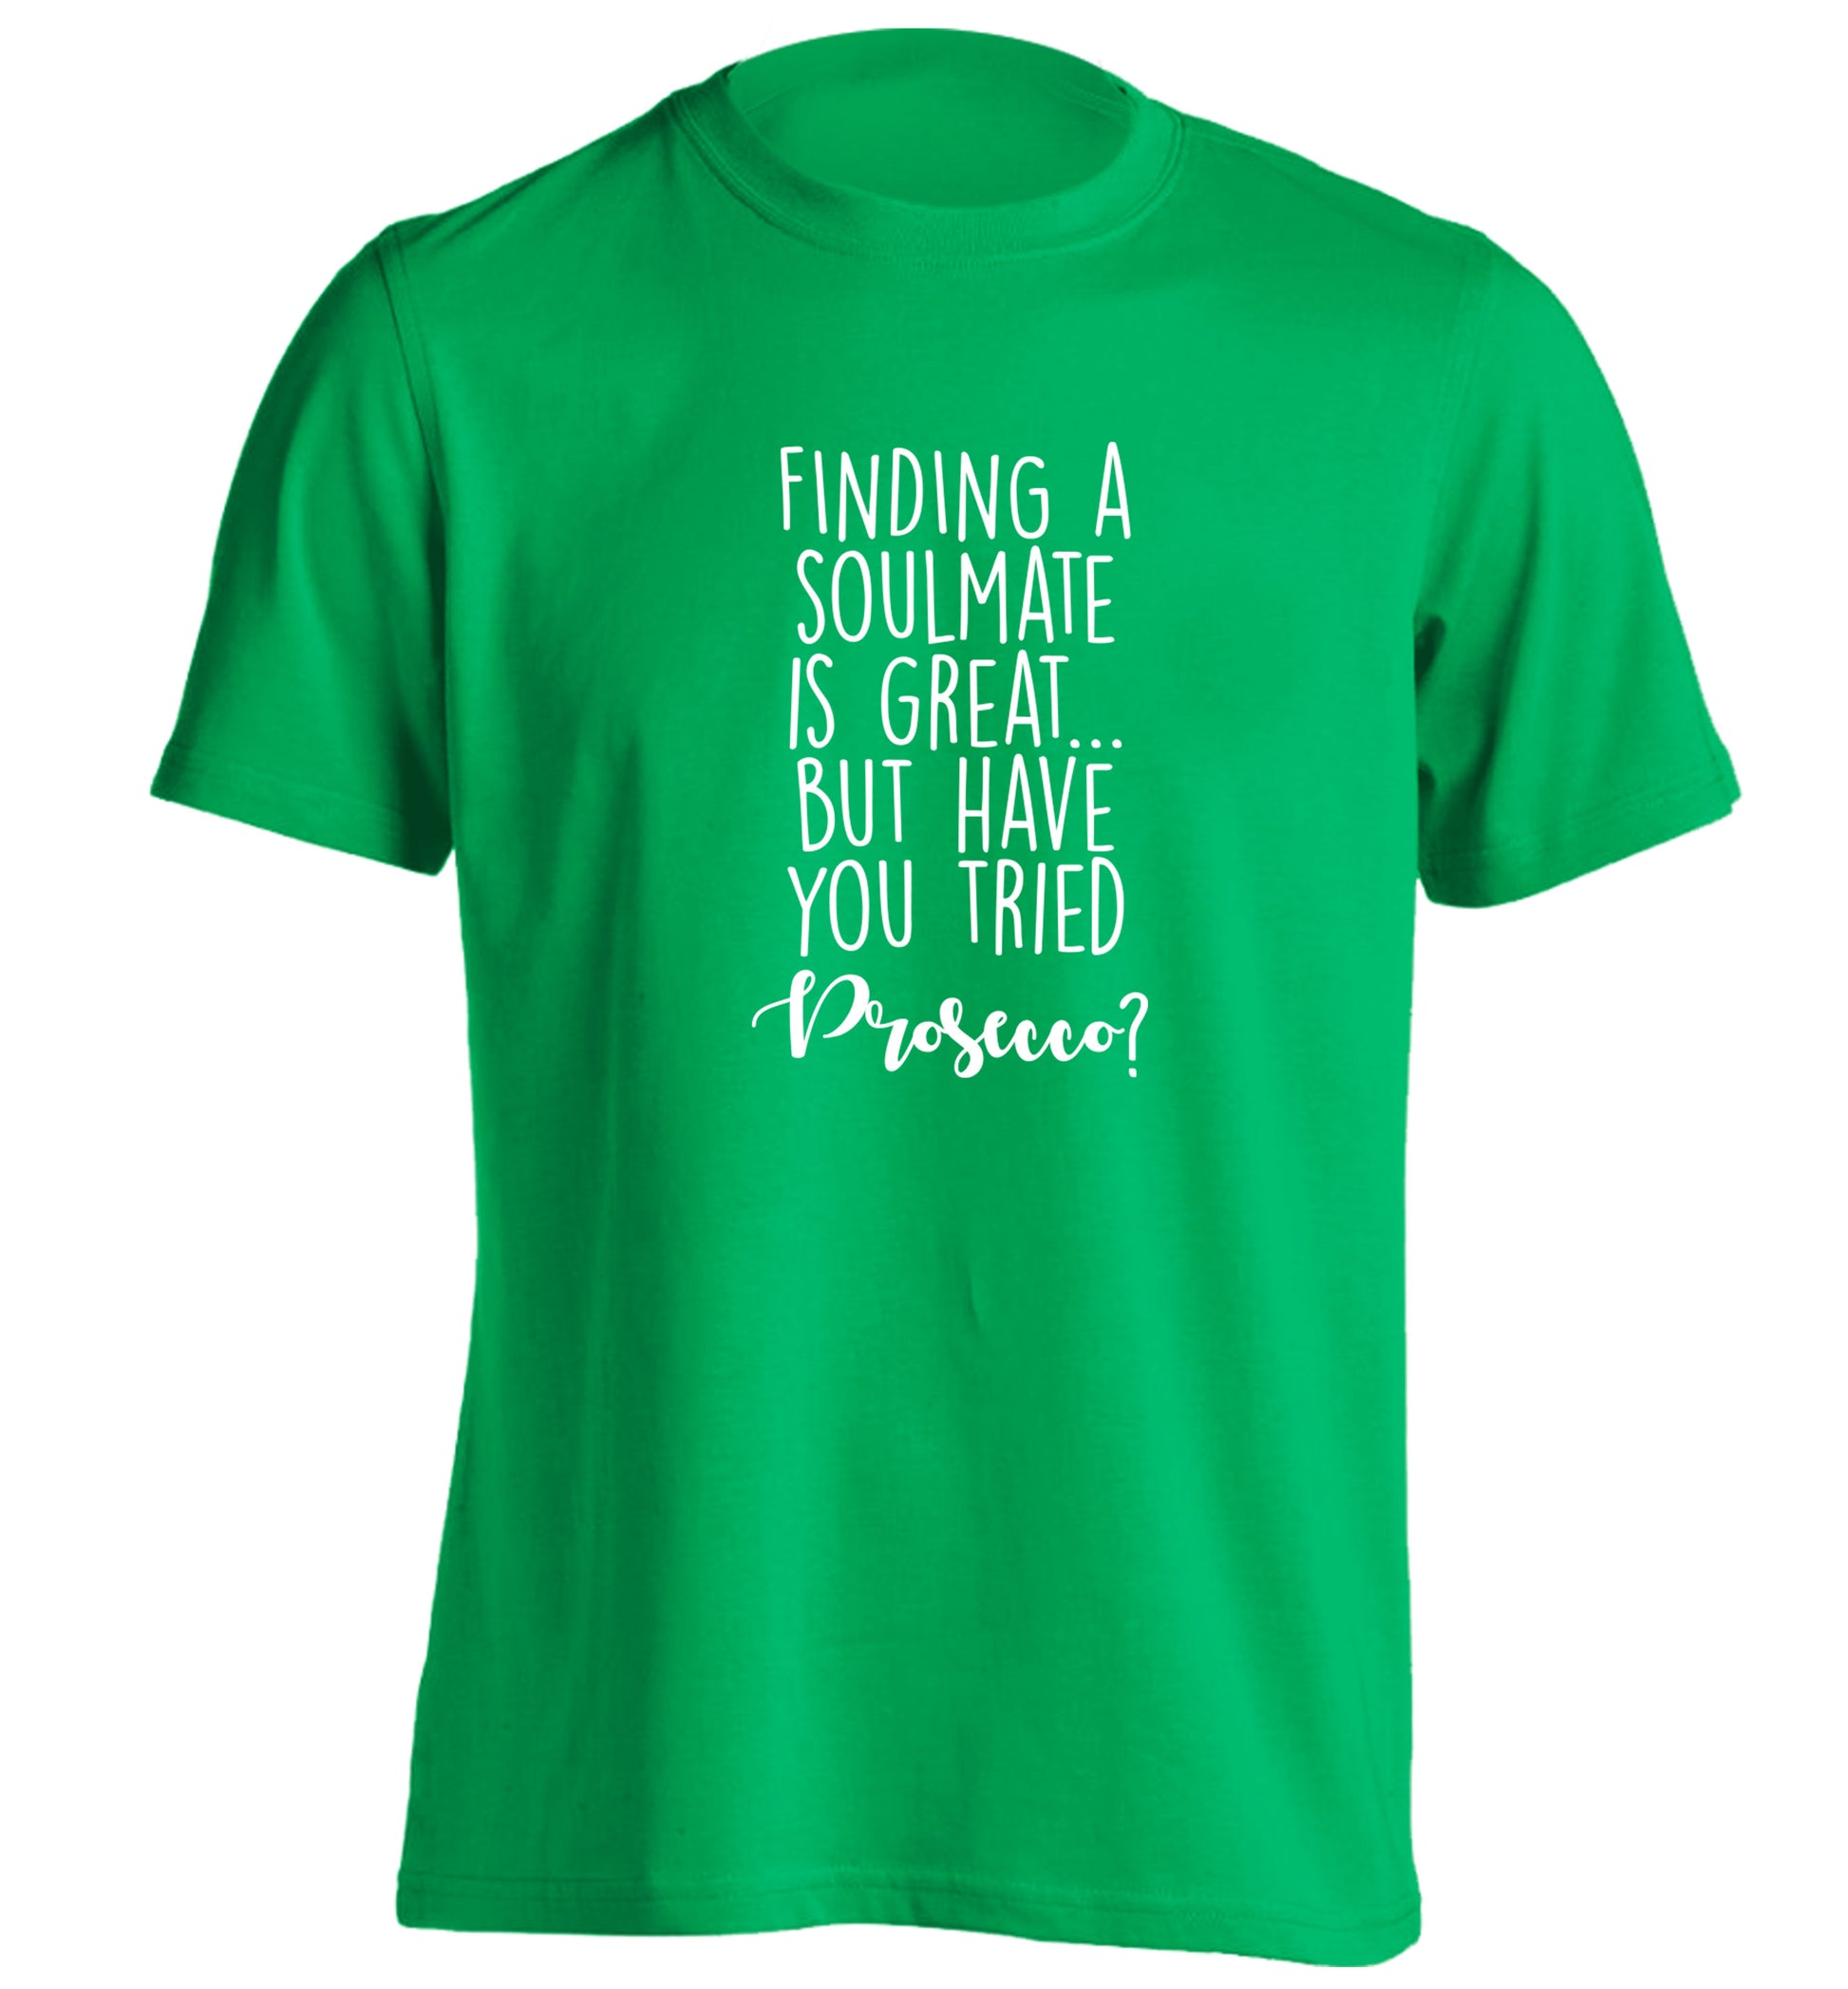 Finding a soulmate is great but have you tried prosecco? adults unisex green Tshirt 2XL